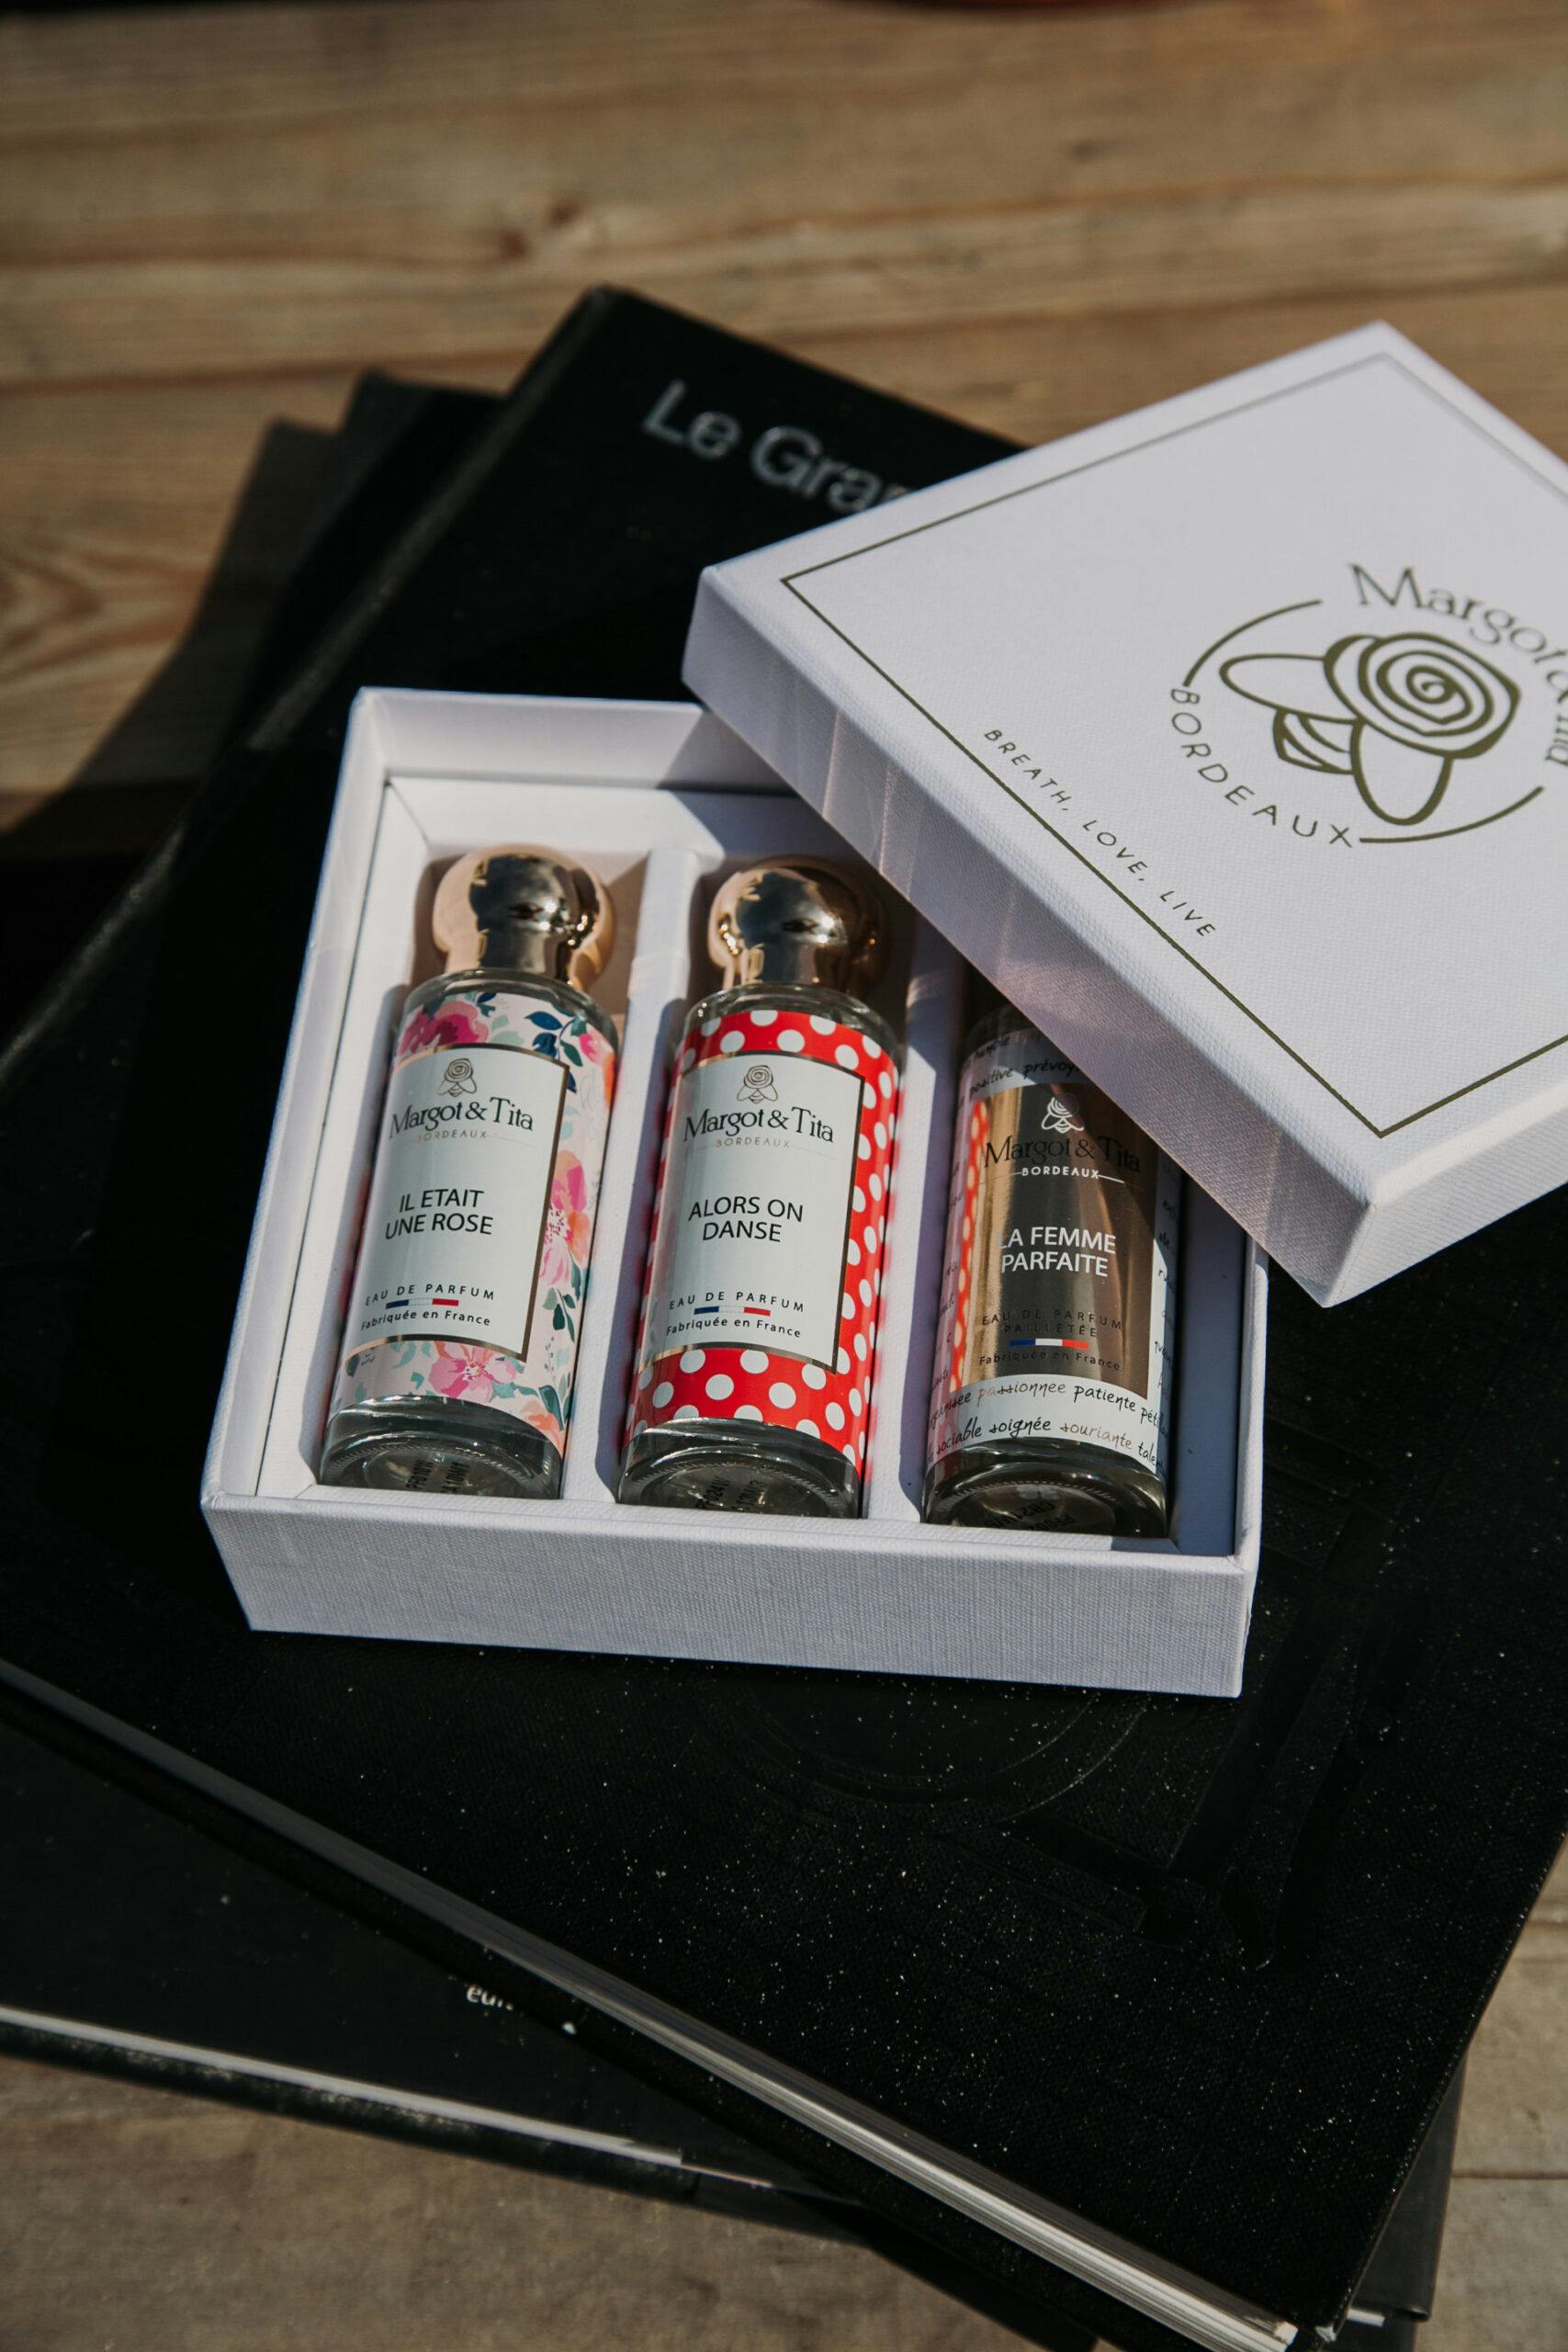 Image of Margot & Tita Chooses Digital Printing to Conquer the World of Fragrances